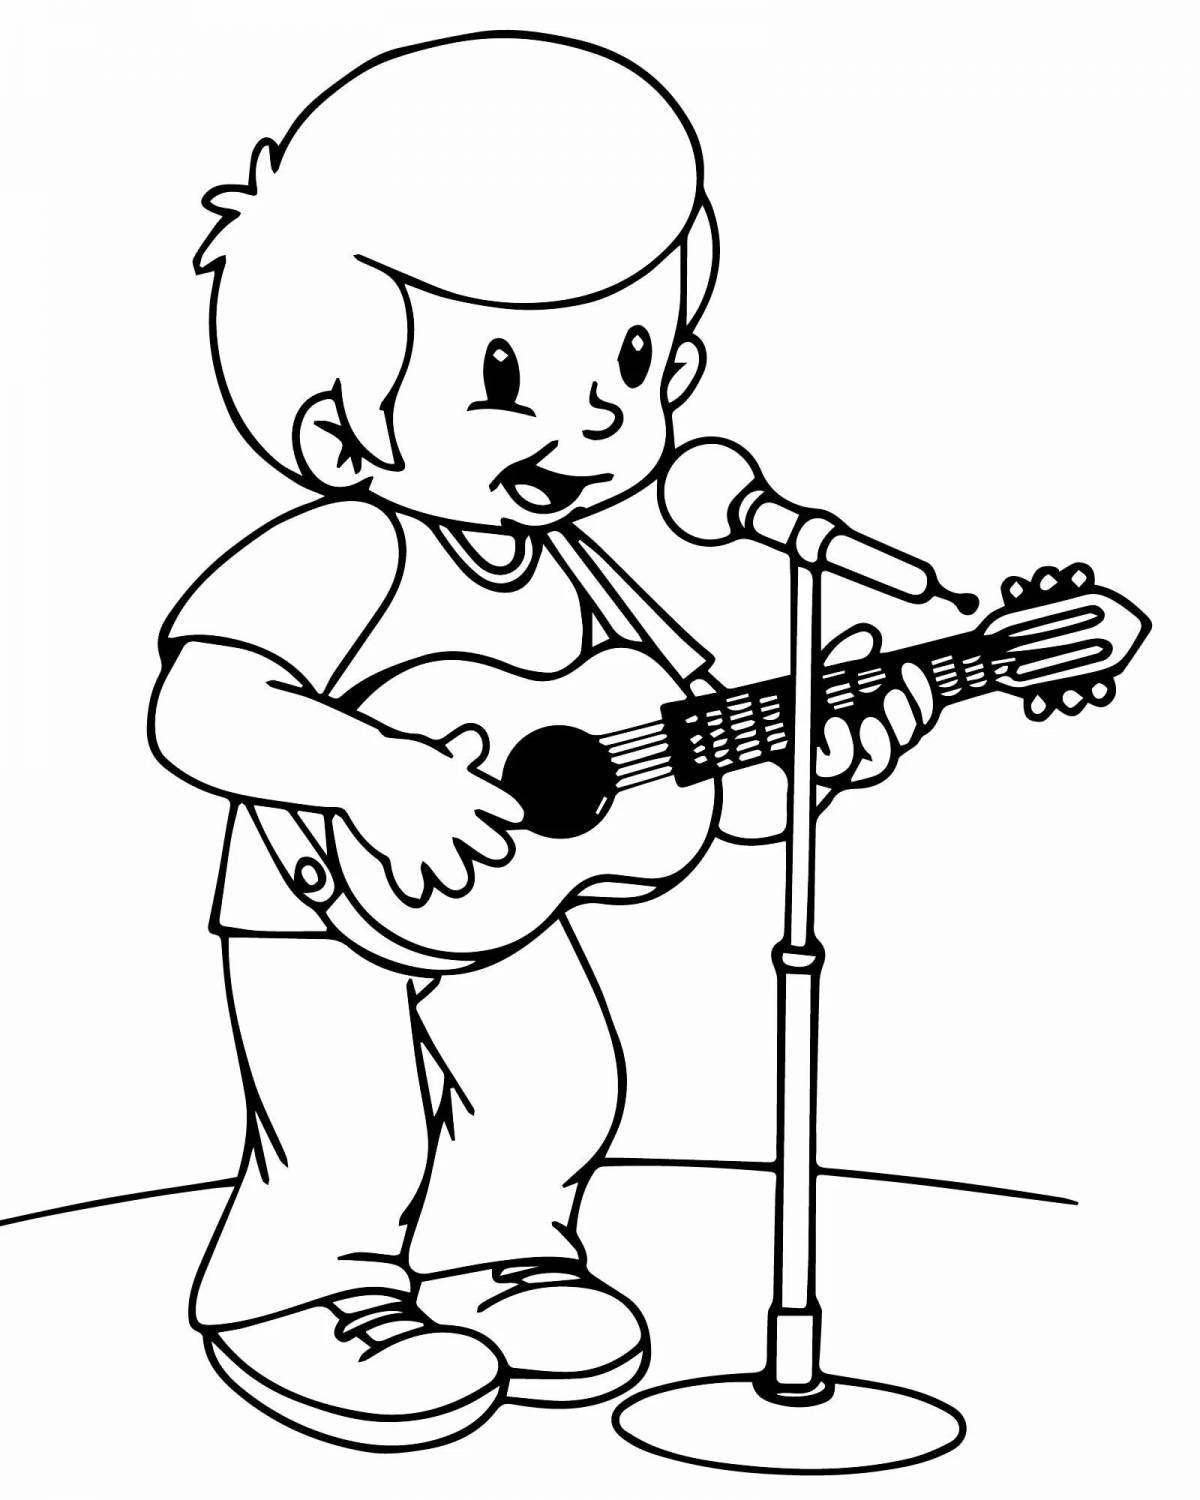 Funny coloring pages with mi